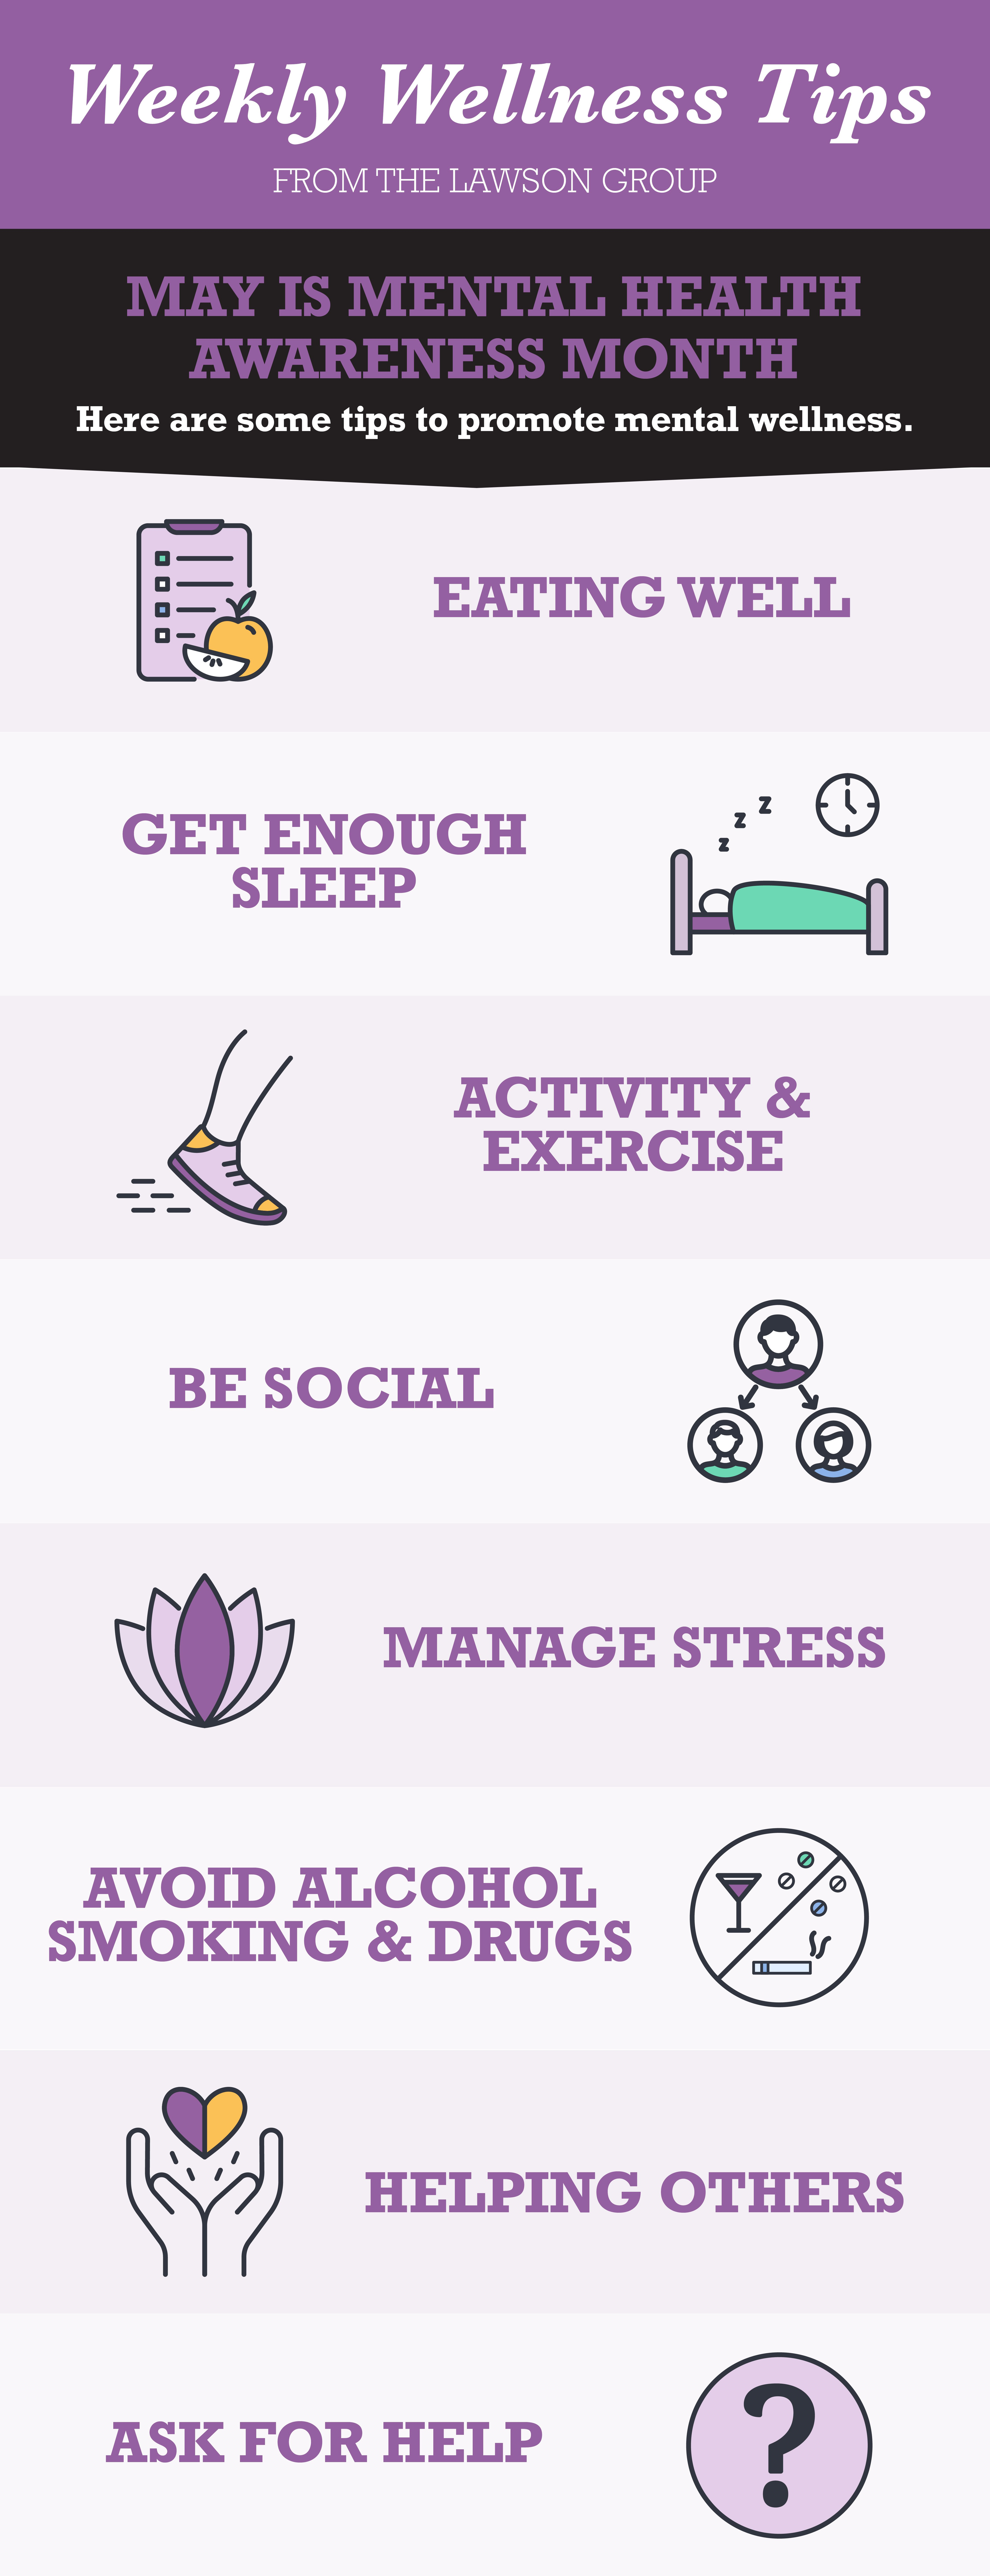 TLG22005 Wellness Tips Mental Health Awareness Month Infographic-1080px-01